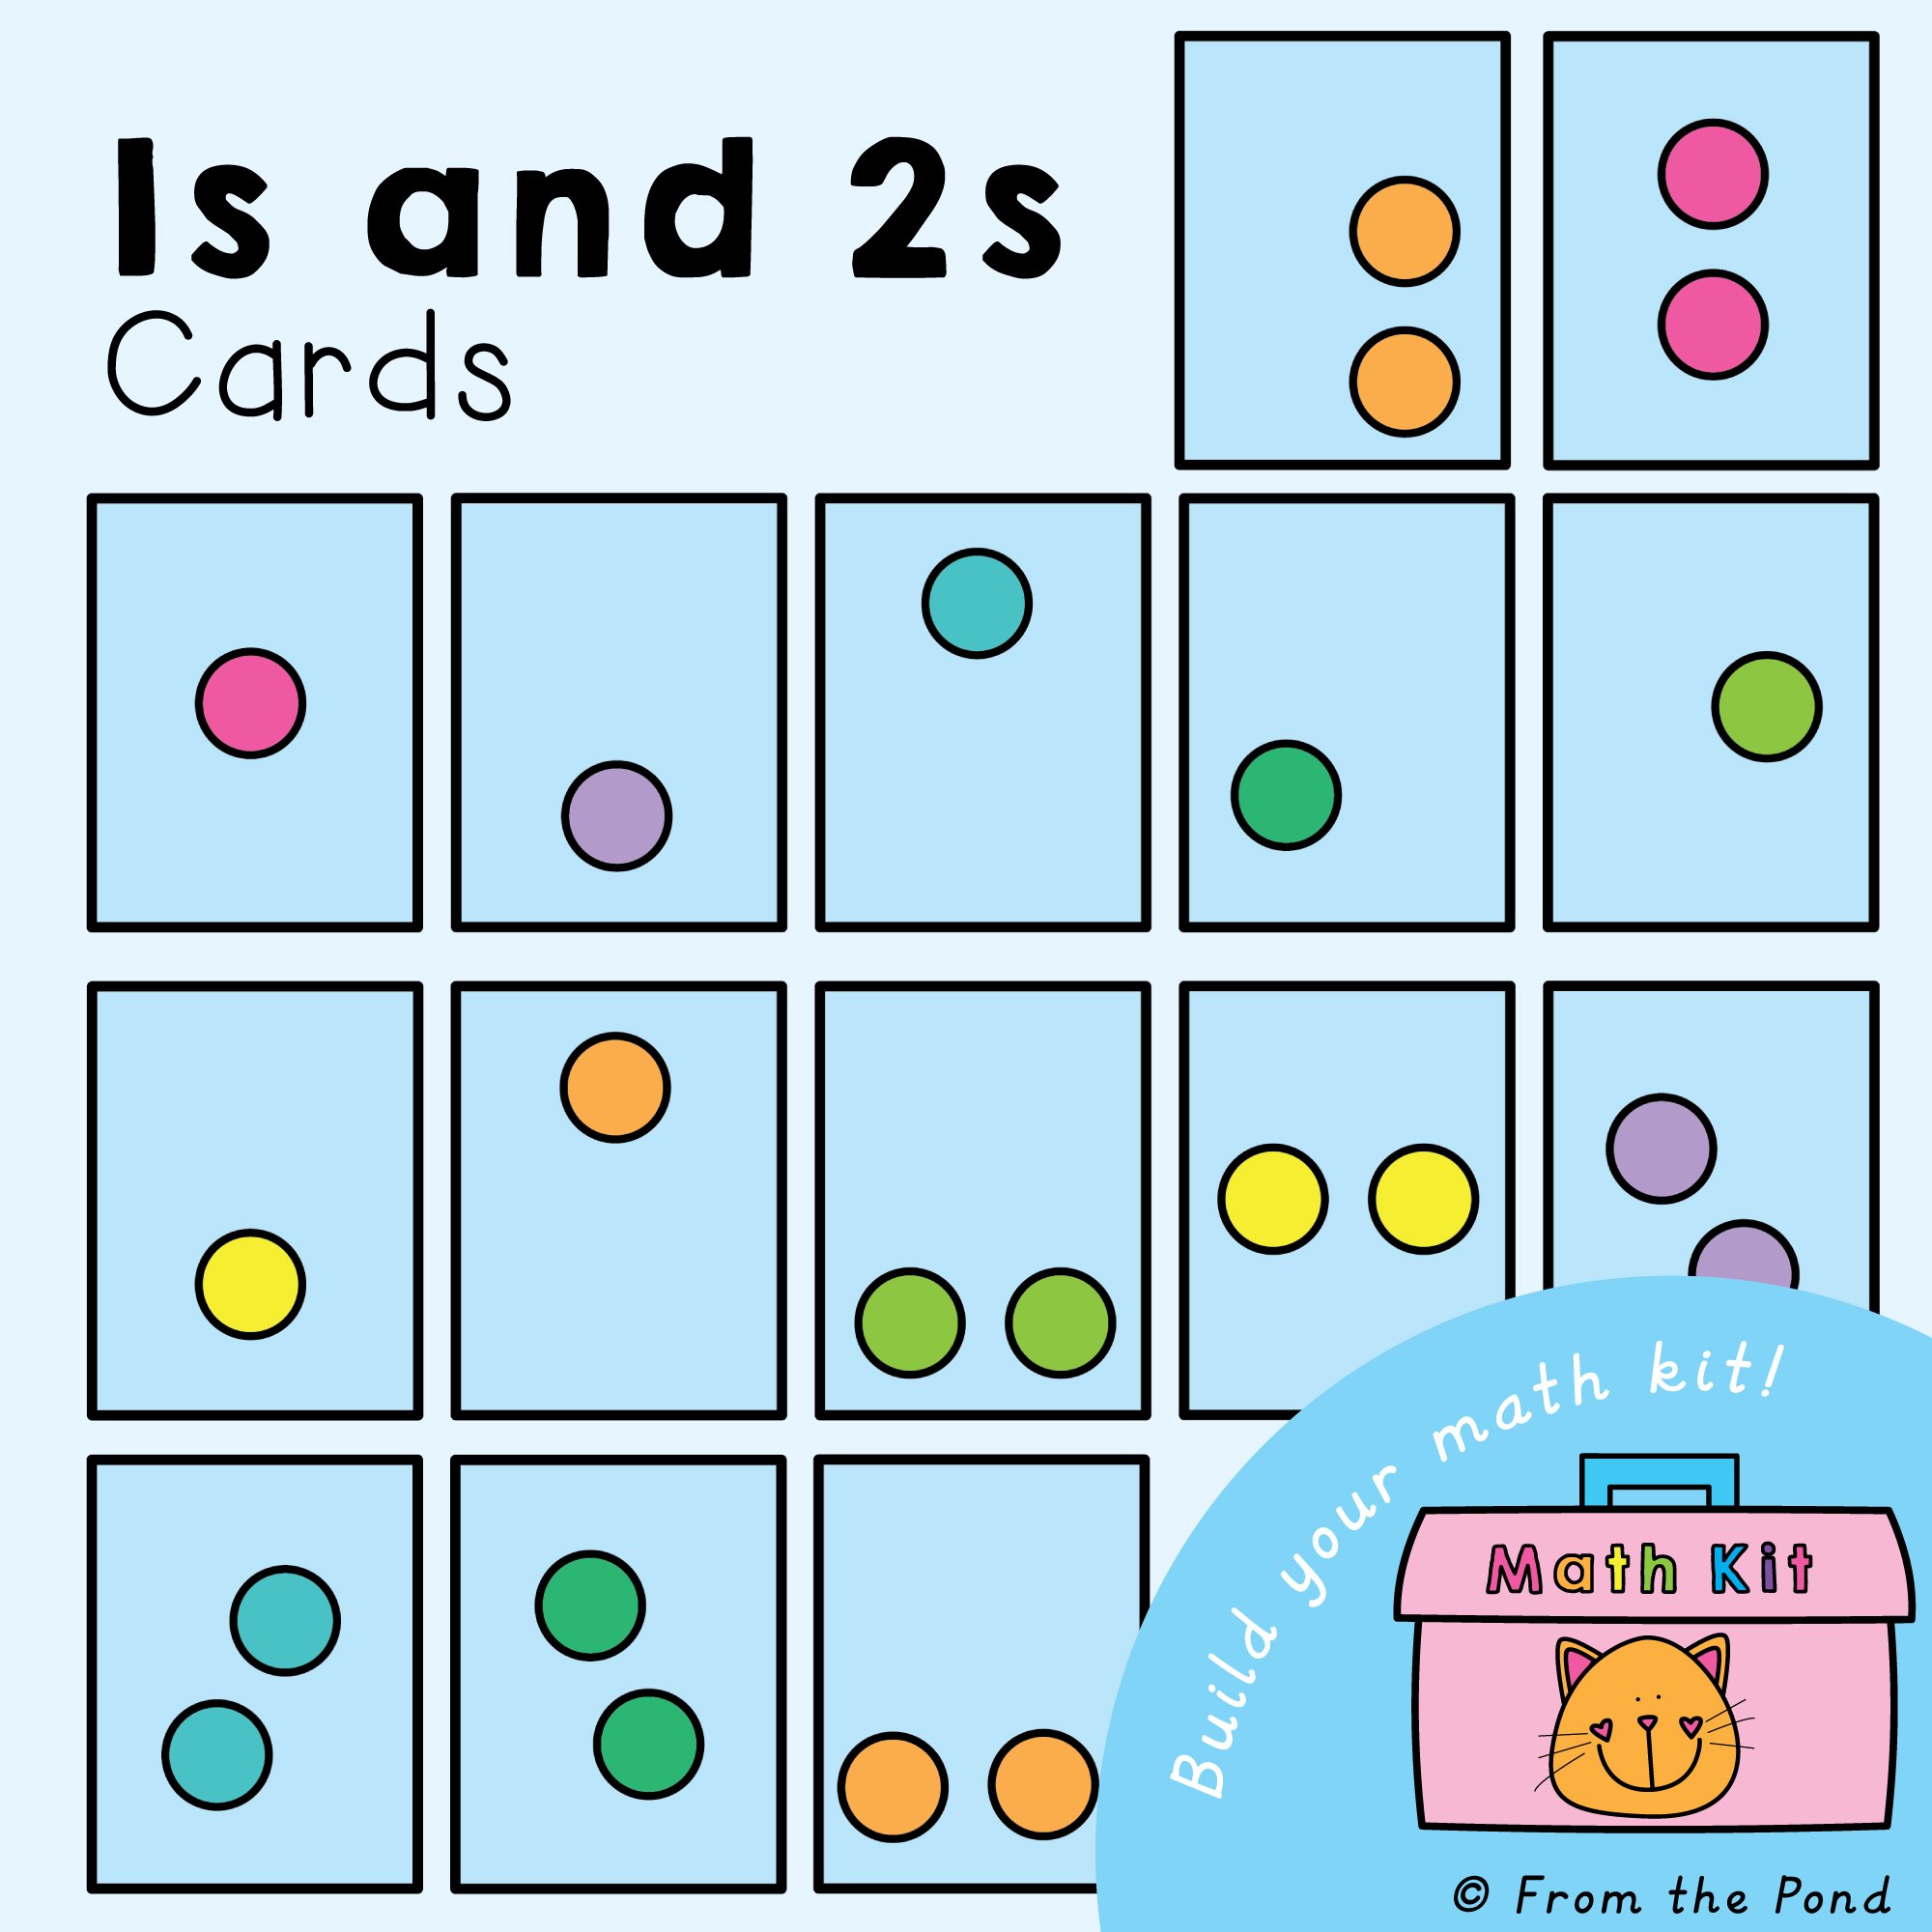 1s-and-2s-cards-math-kit-pic-01.jpg